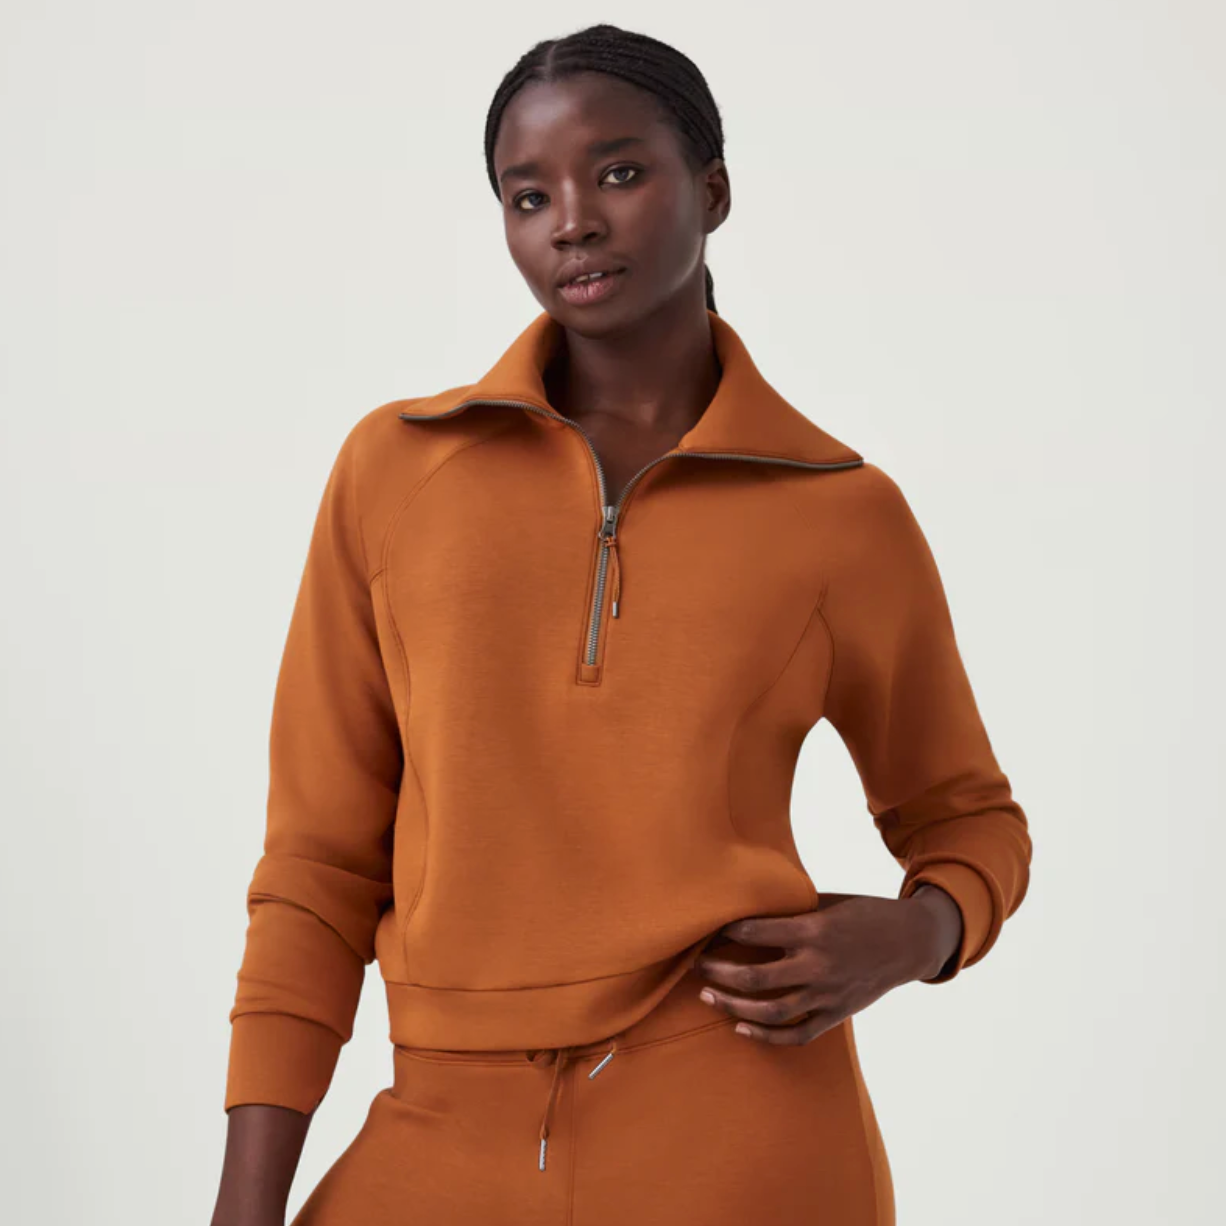 Oprah's Favorite Spanx AirEssentials Set Is Now Available, 54% OFF